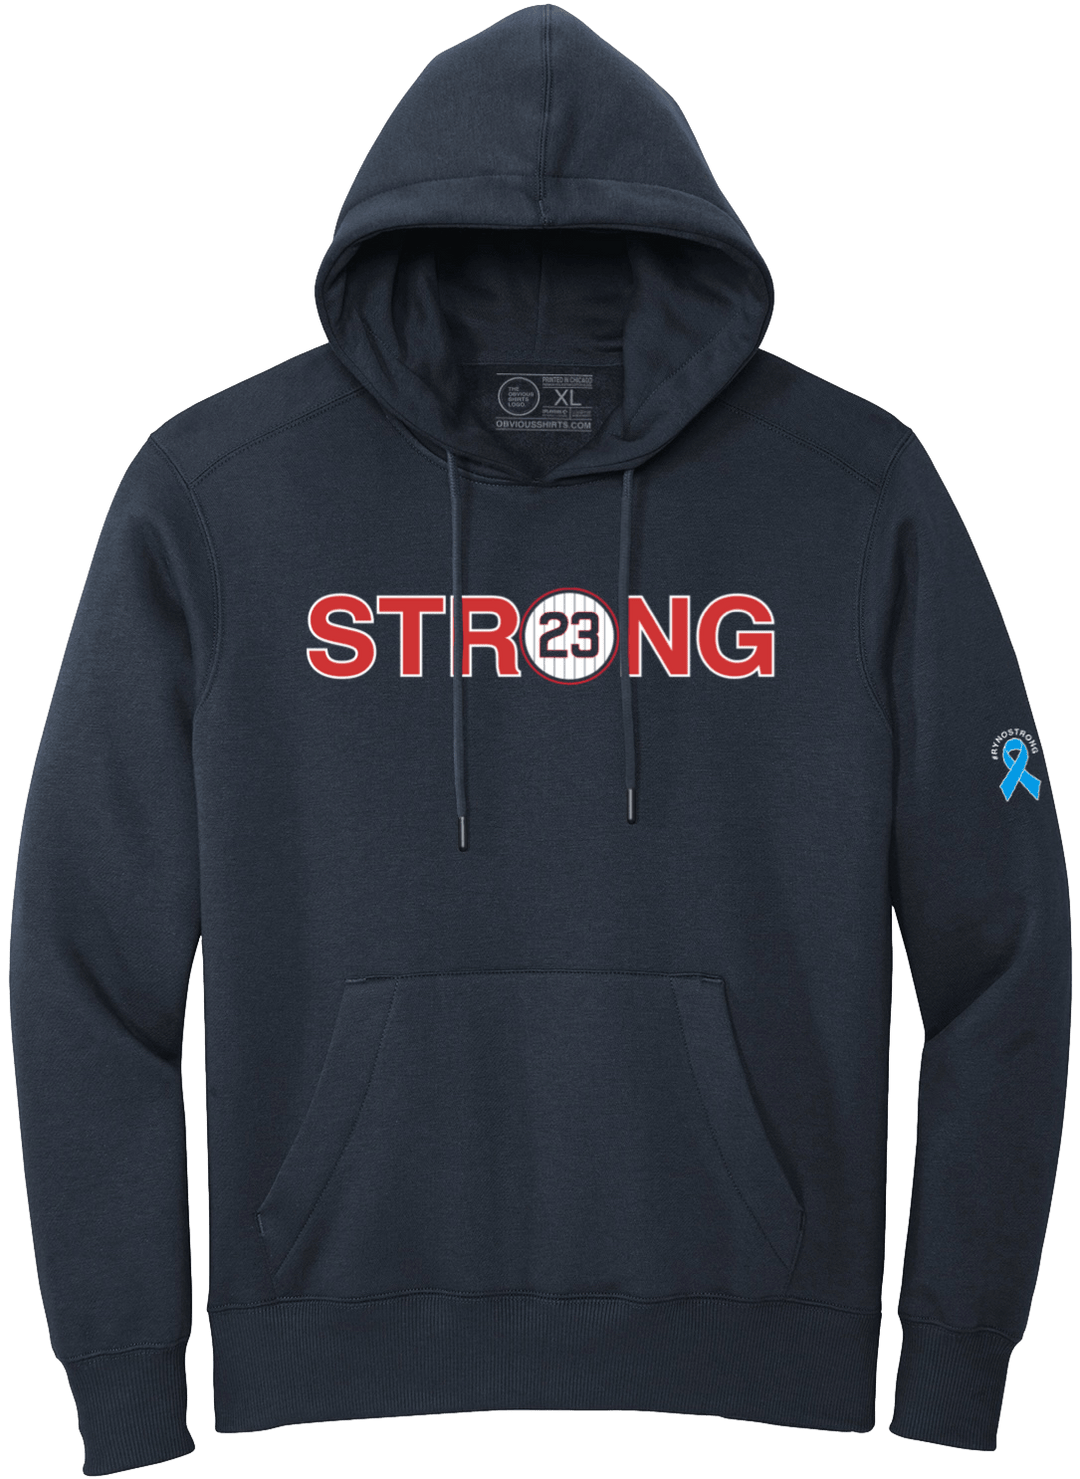 WE ARE ALL RYNO STRONG. (NAVY HOODED SWEATSHIRT) - OBVIOUS SHIRTS